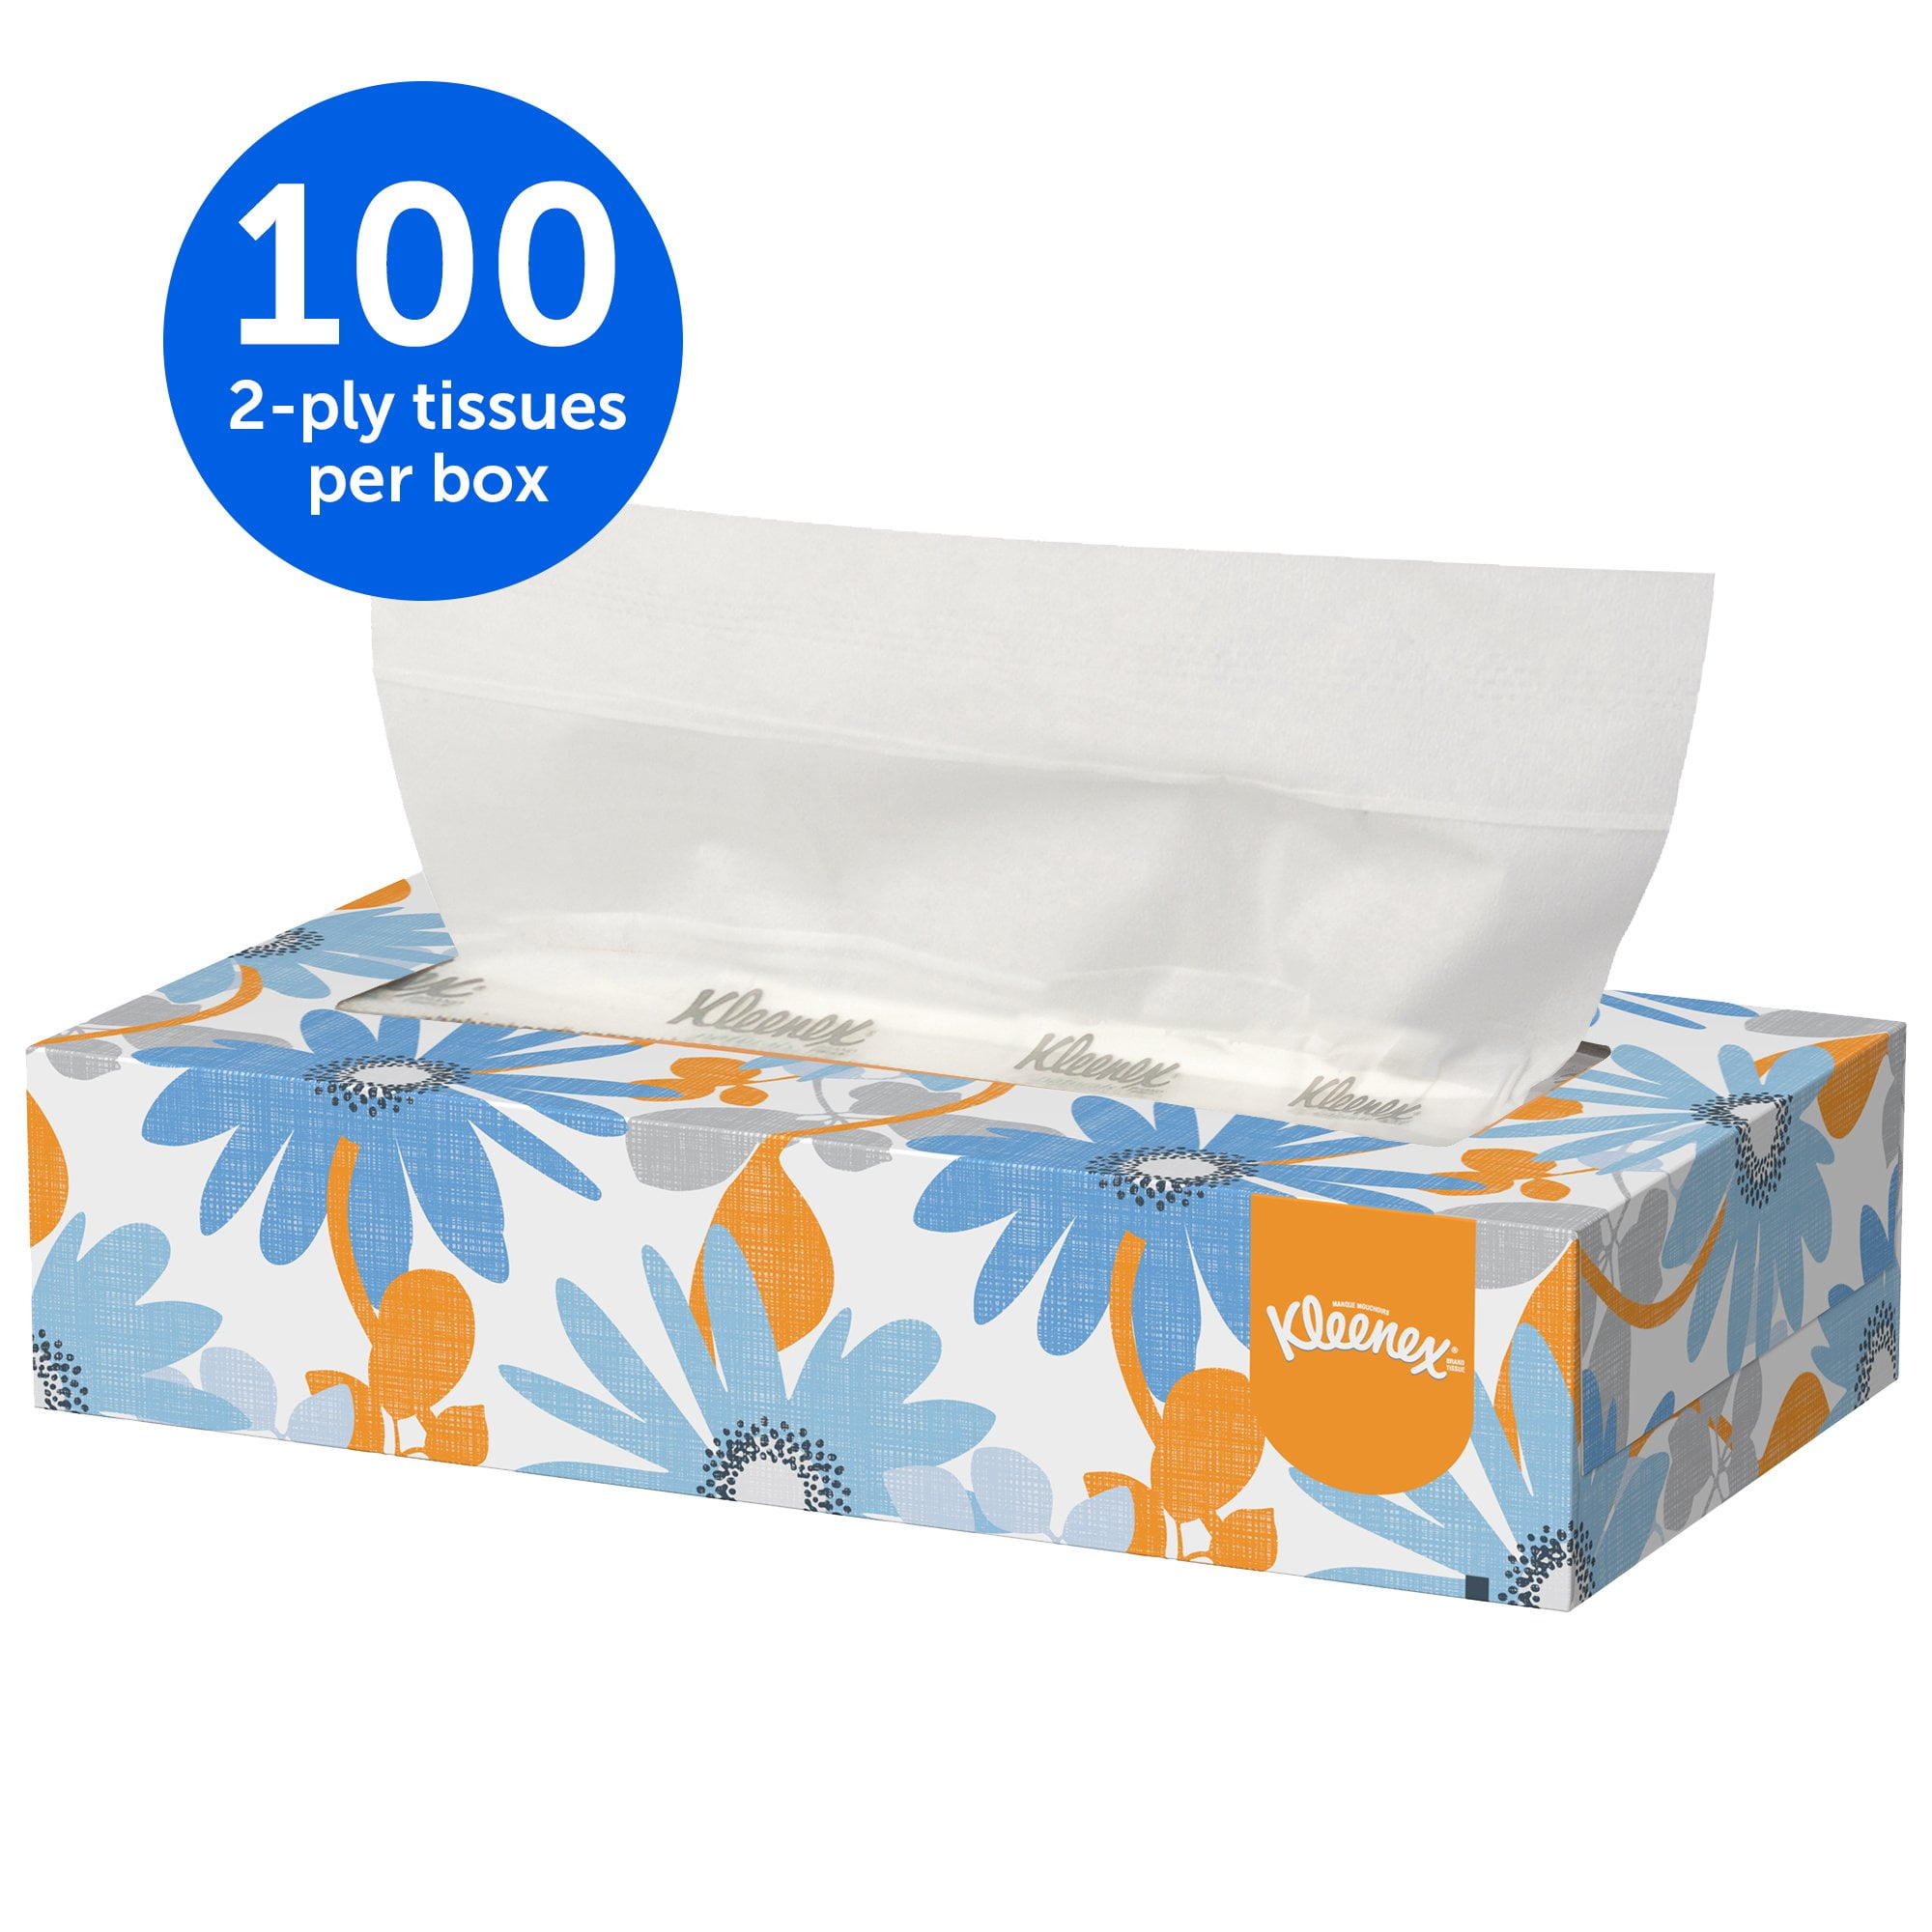 Kleenex - KCC21400 Professional Facial Tissue for Business (21400), Flat  Tissue Boxes, 36 Boxes / Case, 100 Tissues / Box